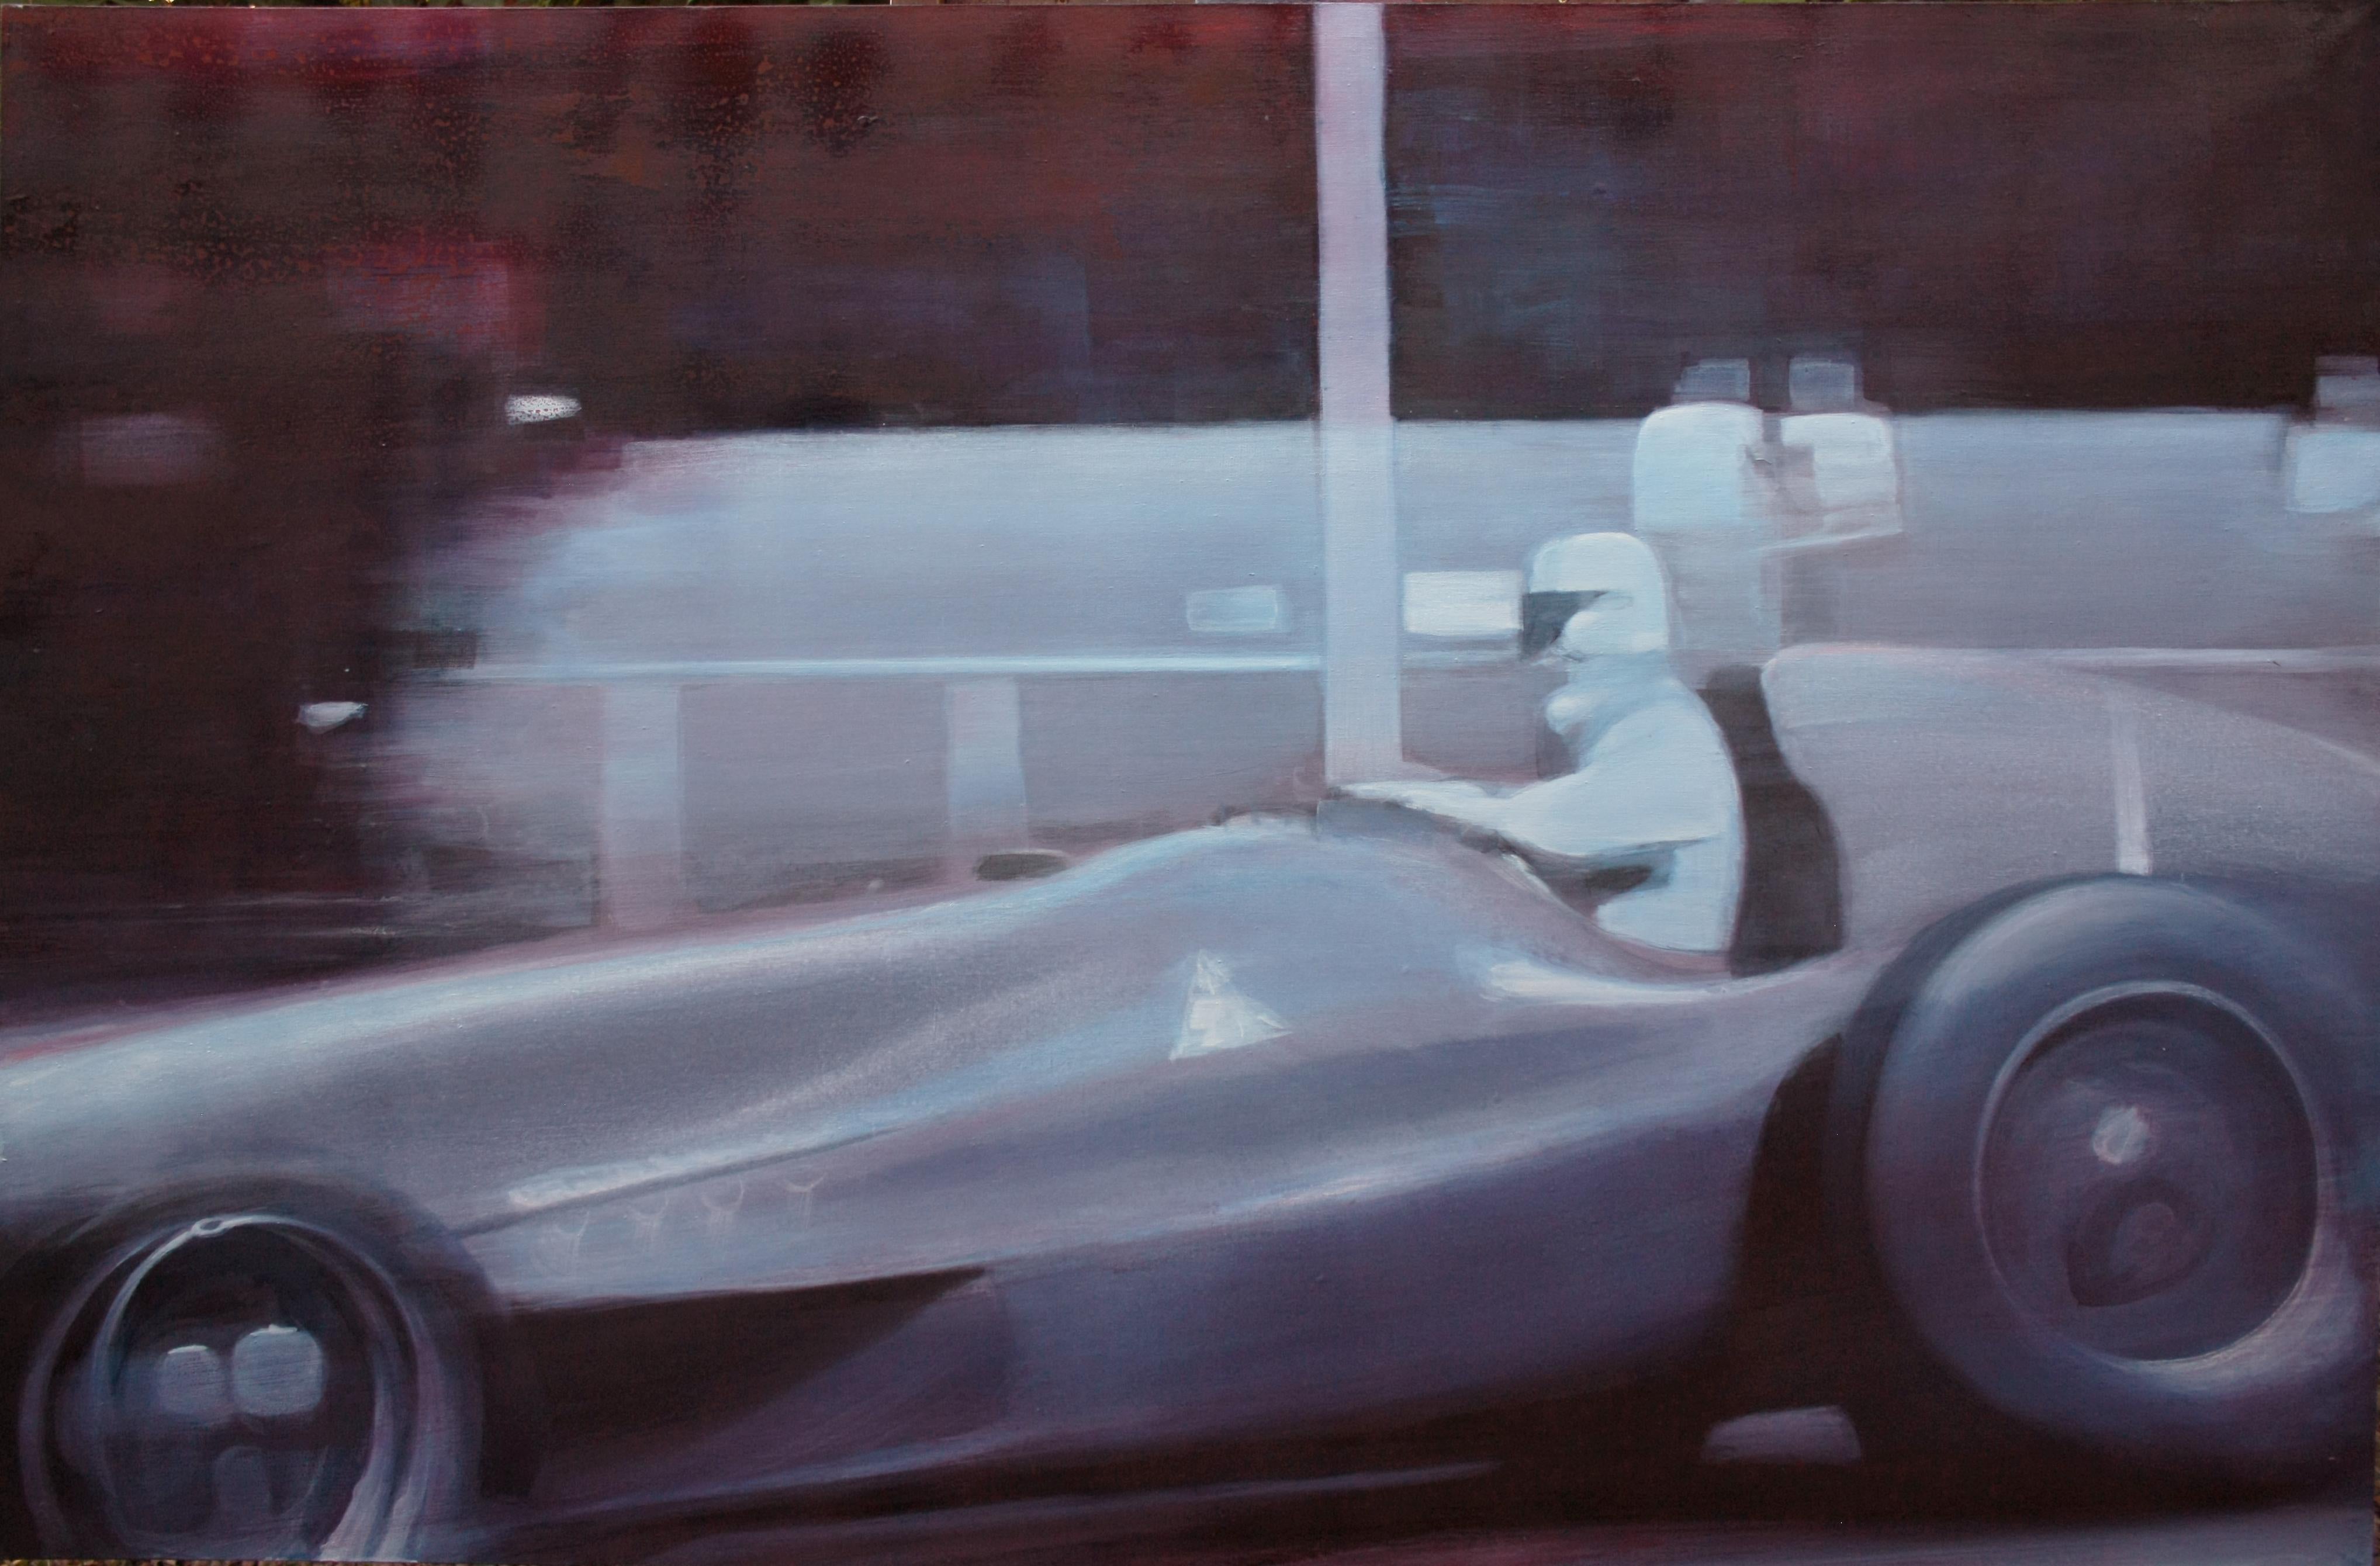 Artificial aging technique, oil & tempera on canvas 
Motion 16 is referred to second FIA Formula 1 World Championship for Drivers. The race was held at Spa-Francorchamps in Belgium in 1951. Emilio Giuseppe Farina was driving an Alfa Romeo. The image